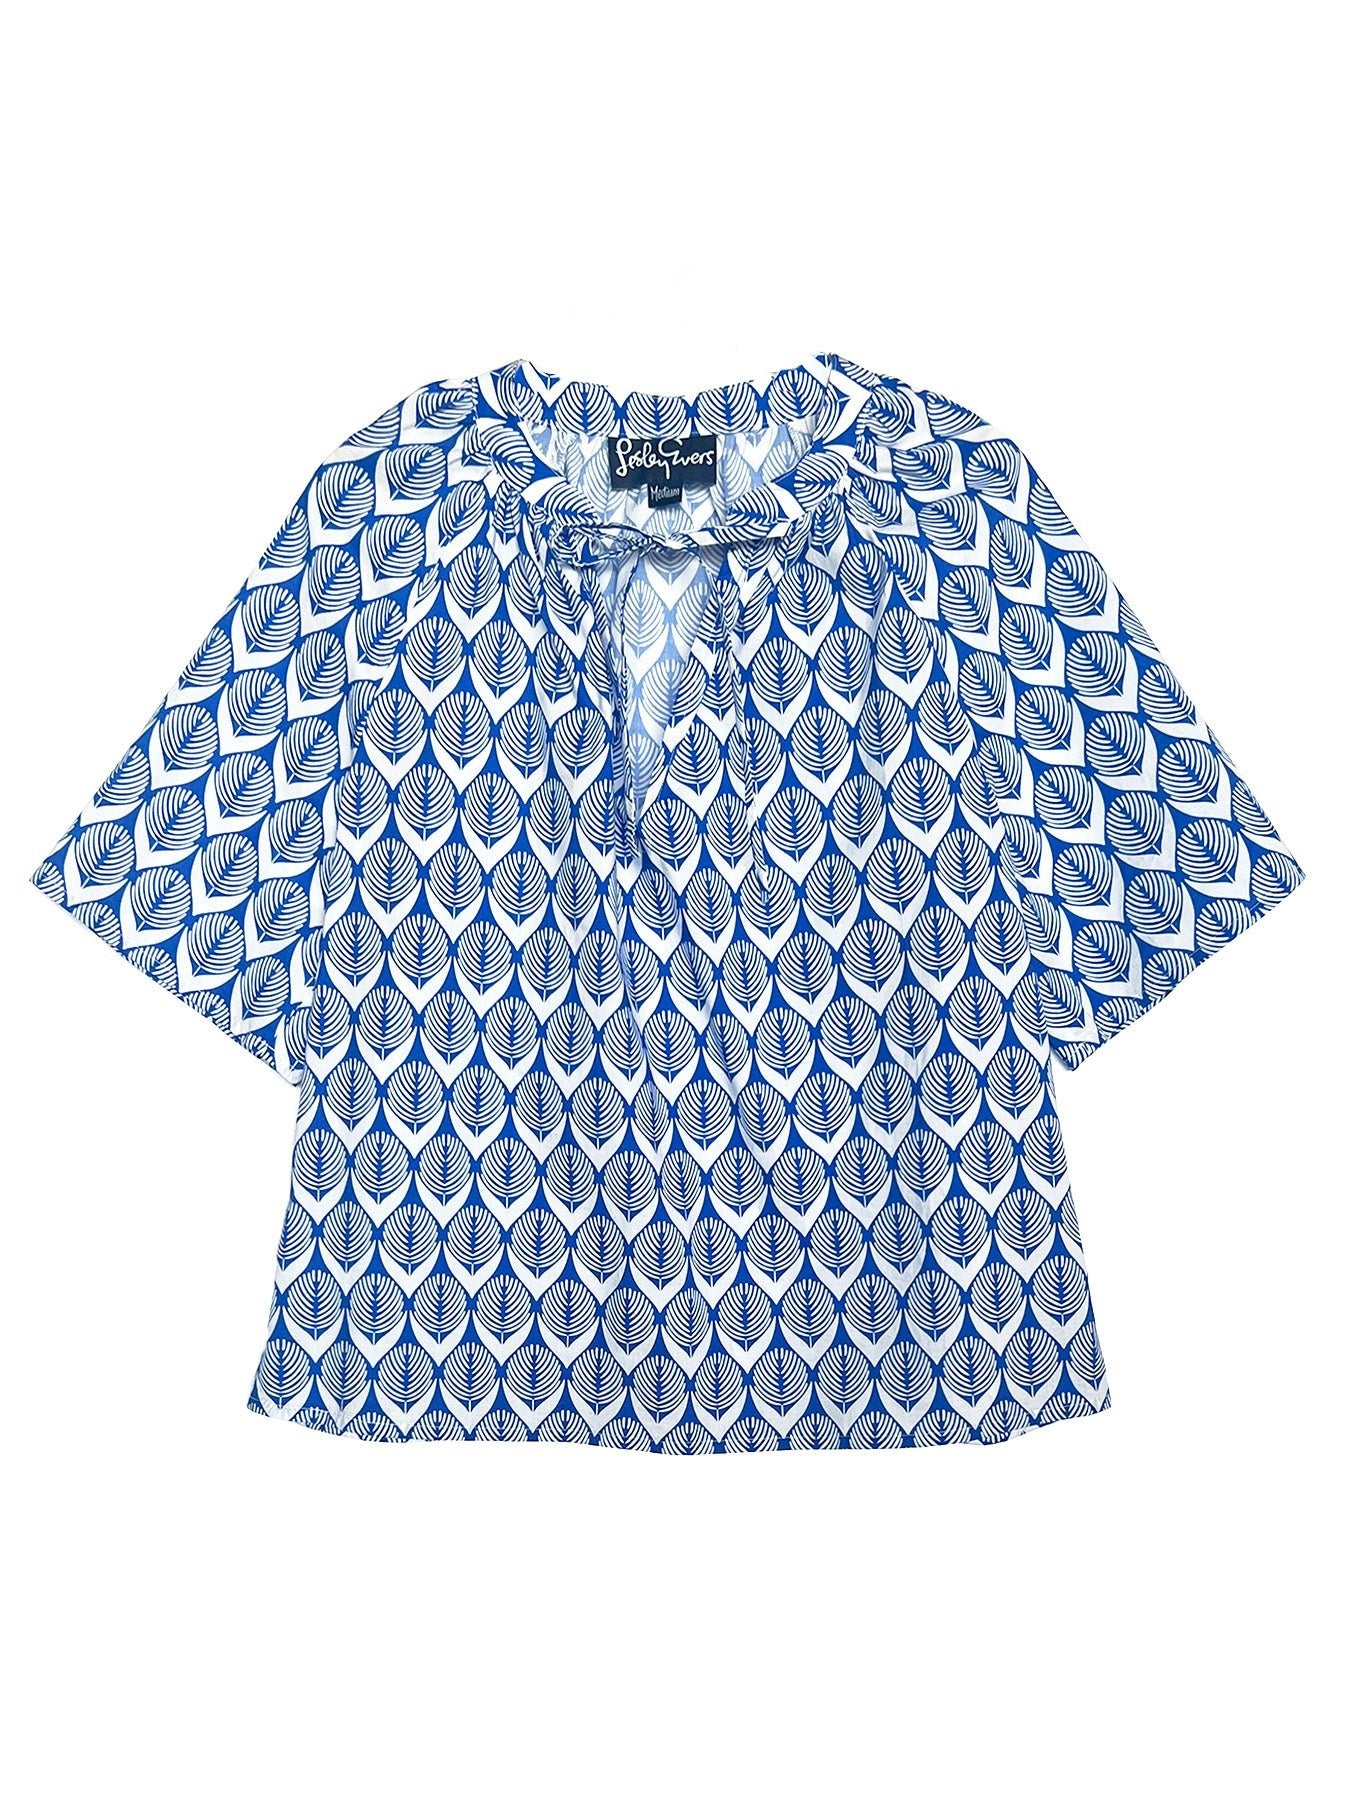 WILLOW blouse Danish Flower Blue - Lesley Evers-Shop-Shop/All Products-Shop/Separates